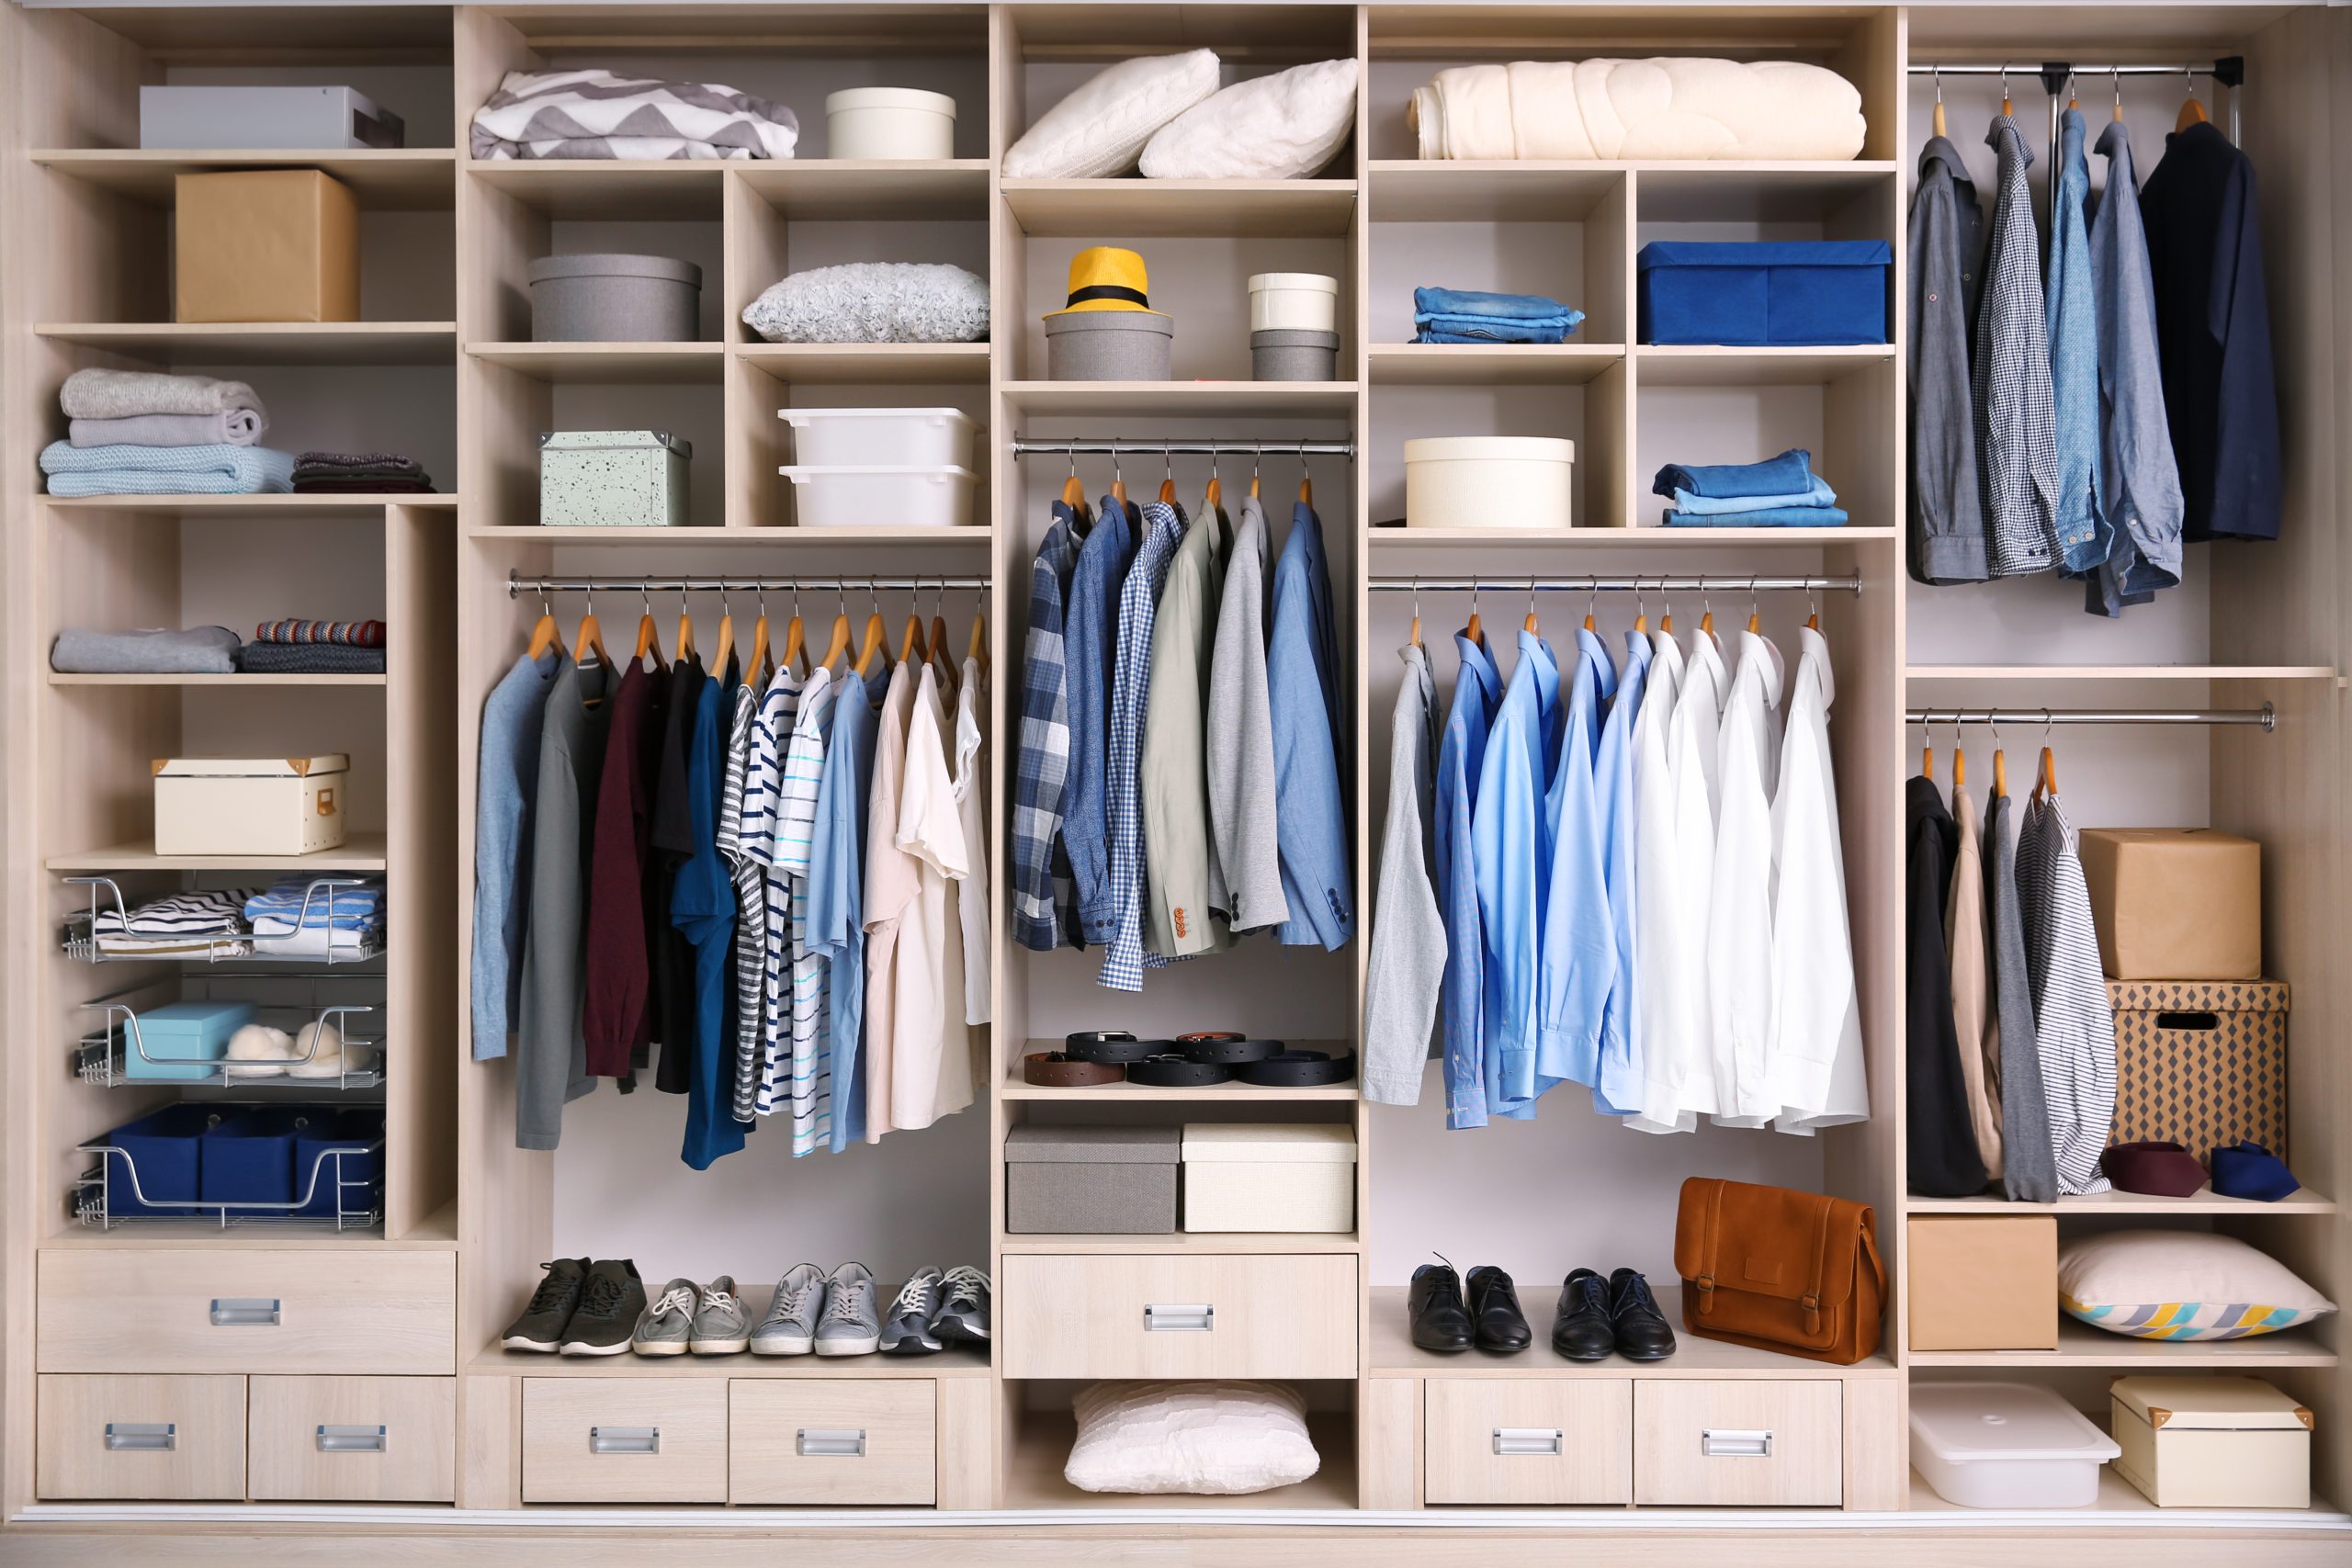 Big,Wardrobe,With,Male,Clothes,For,Dressing,Room